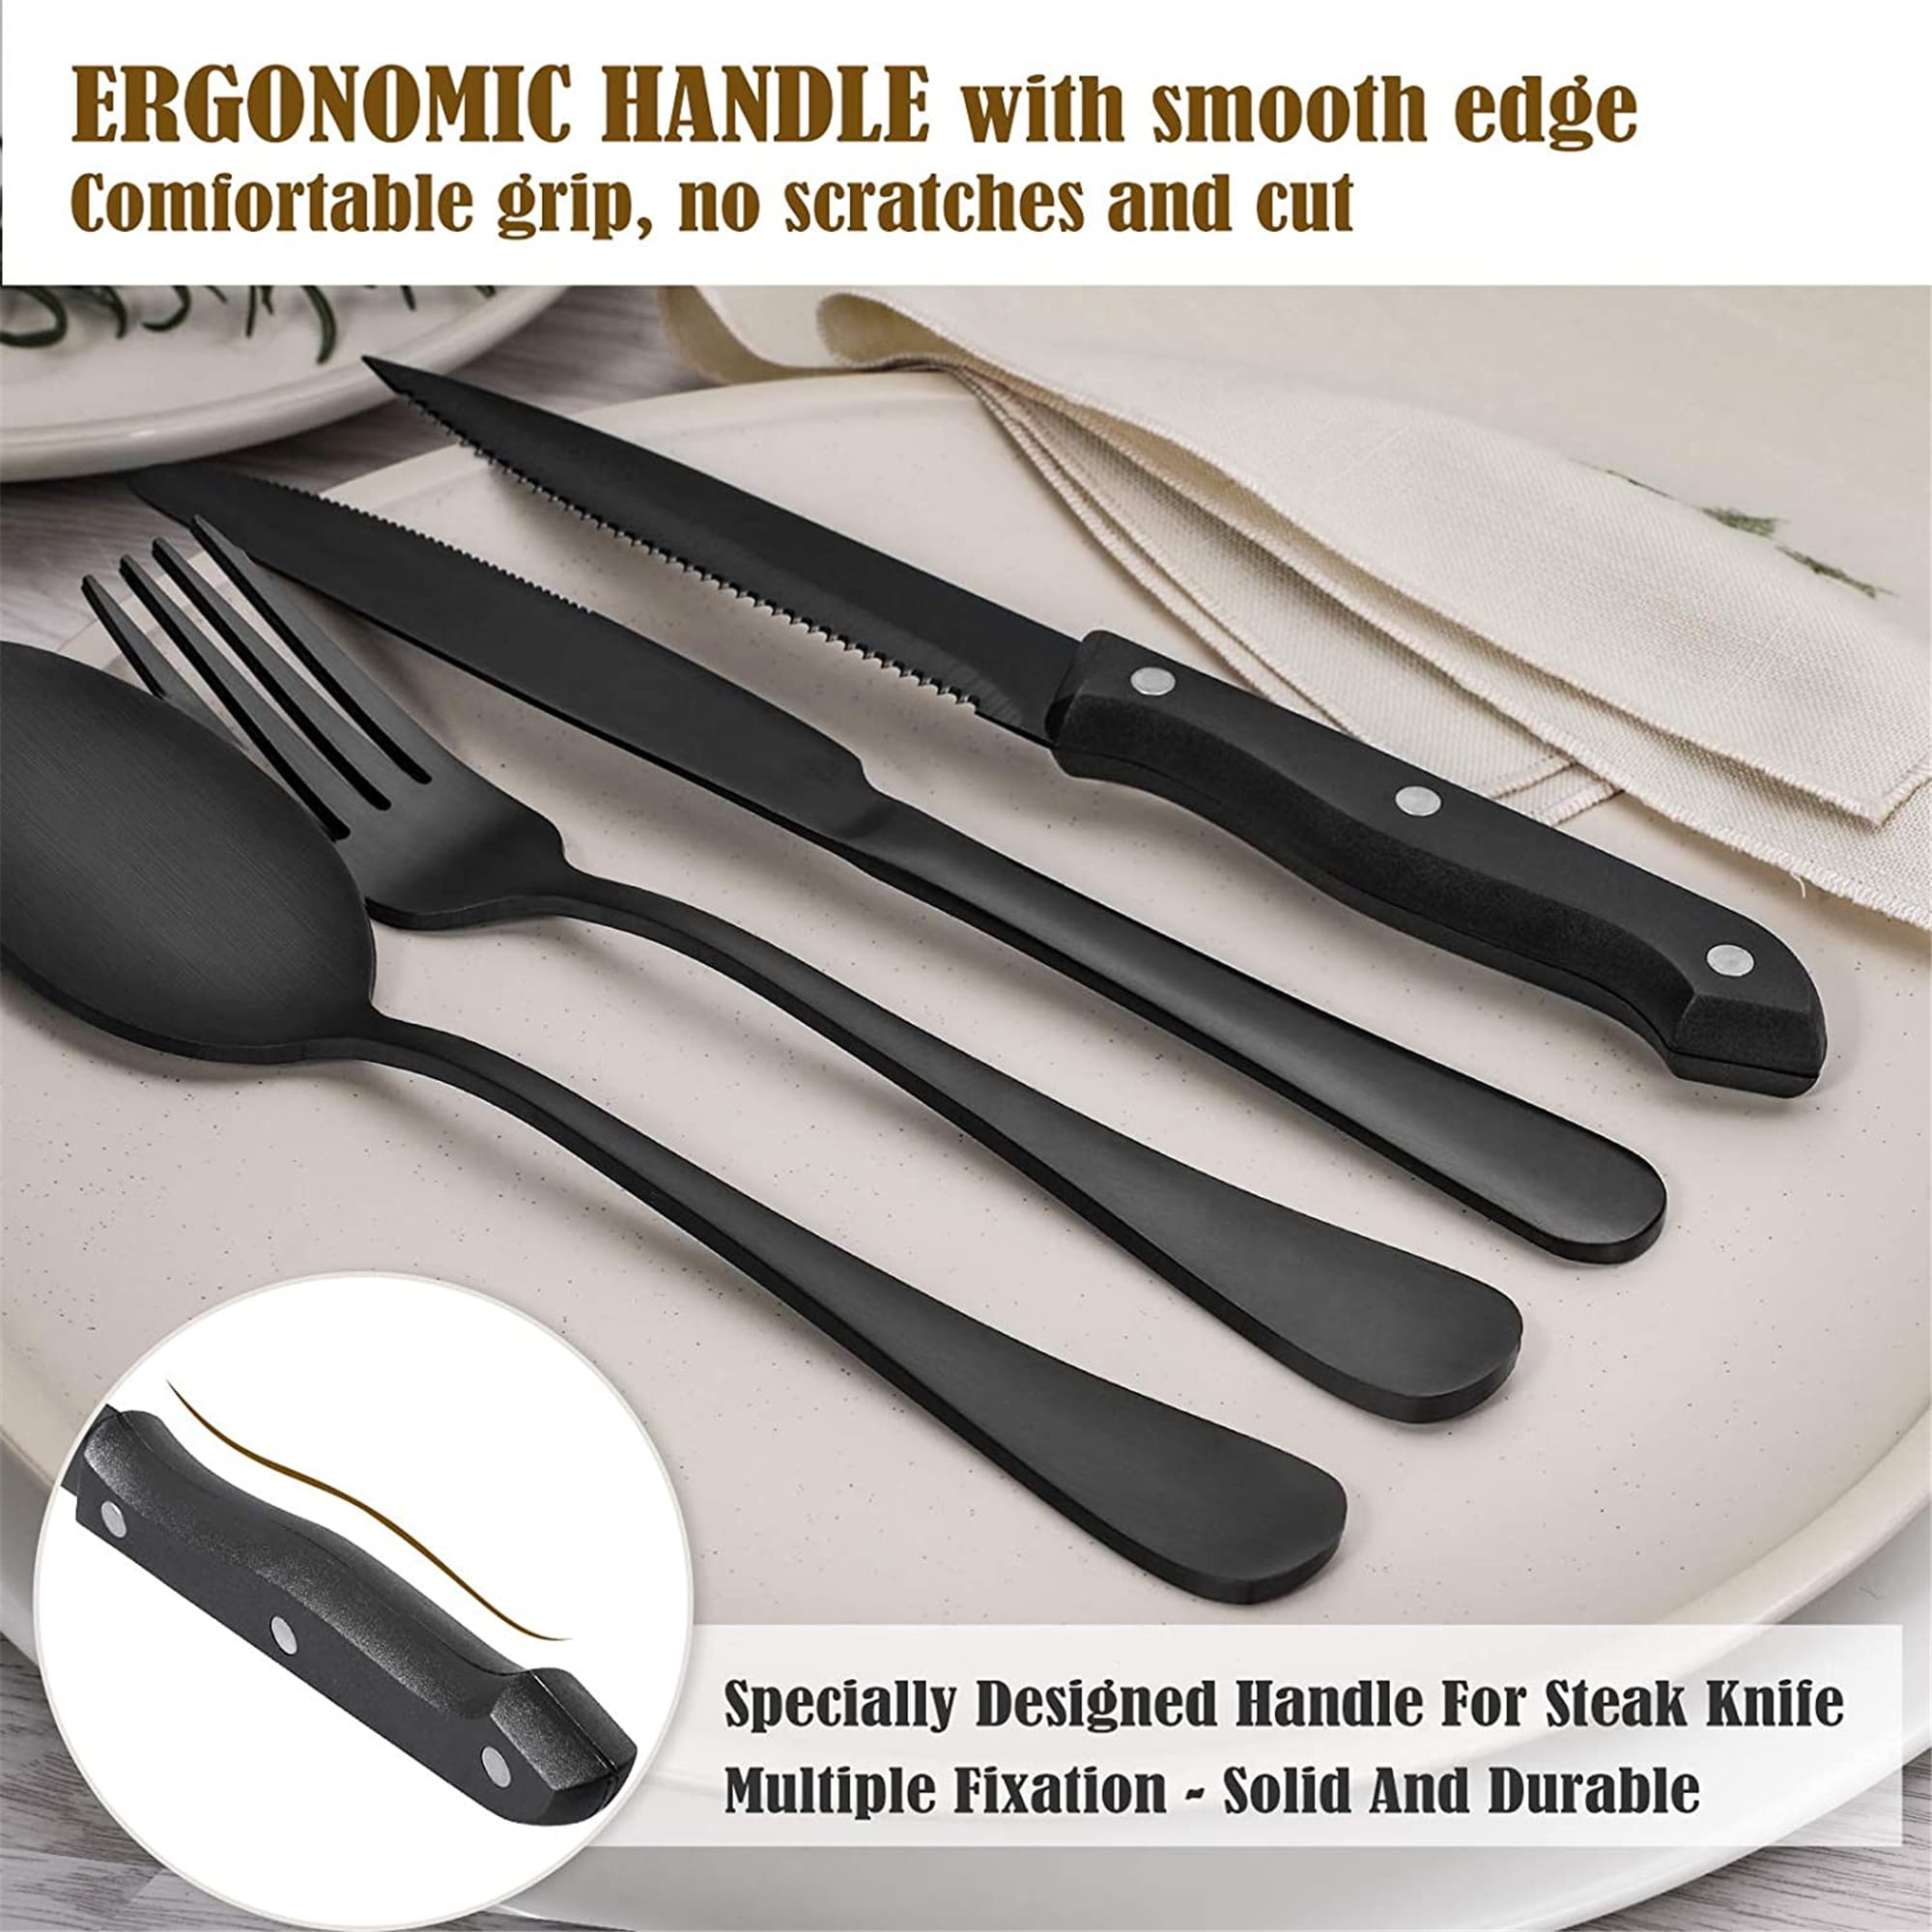 https://ak1.ostkcdn.com/images/products/is/images/direct/11a700f5e347595fb654283c8576276d1233395c/48-Piece-Matte-Black-Silverware-Set-for-8-by-Hiware%2C-Stainless-Steel-Flatware-Set-with-Steak-Knives.jpg